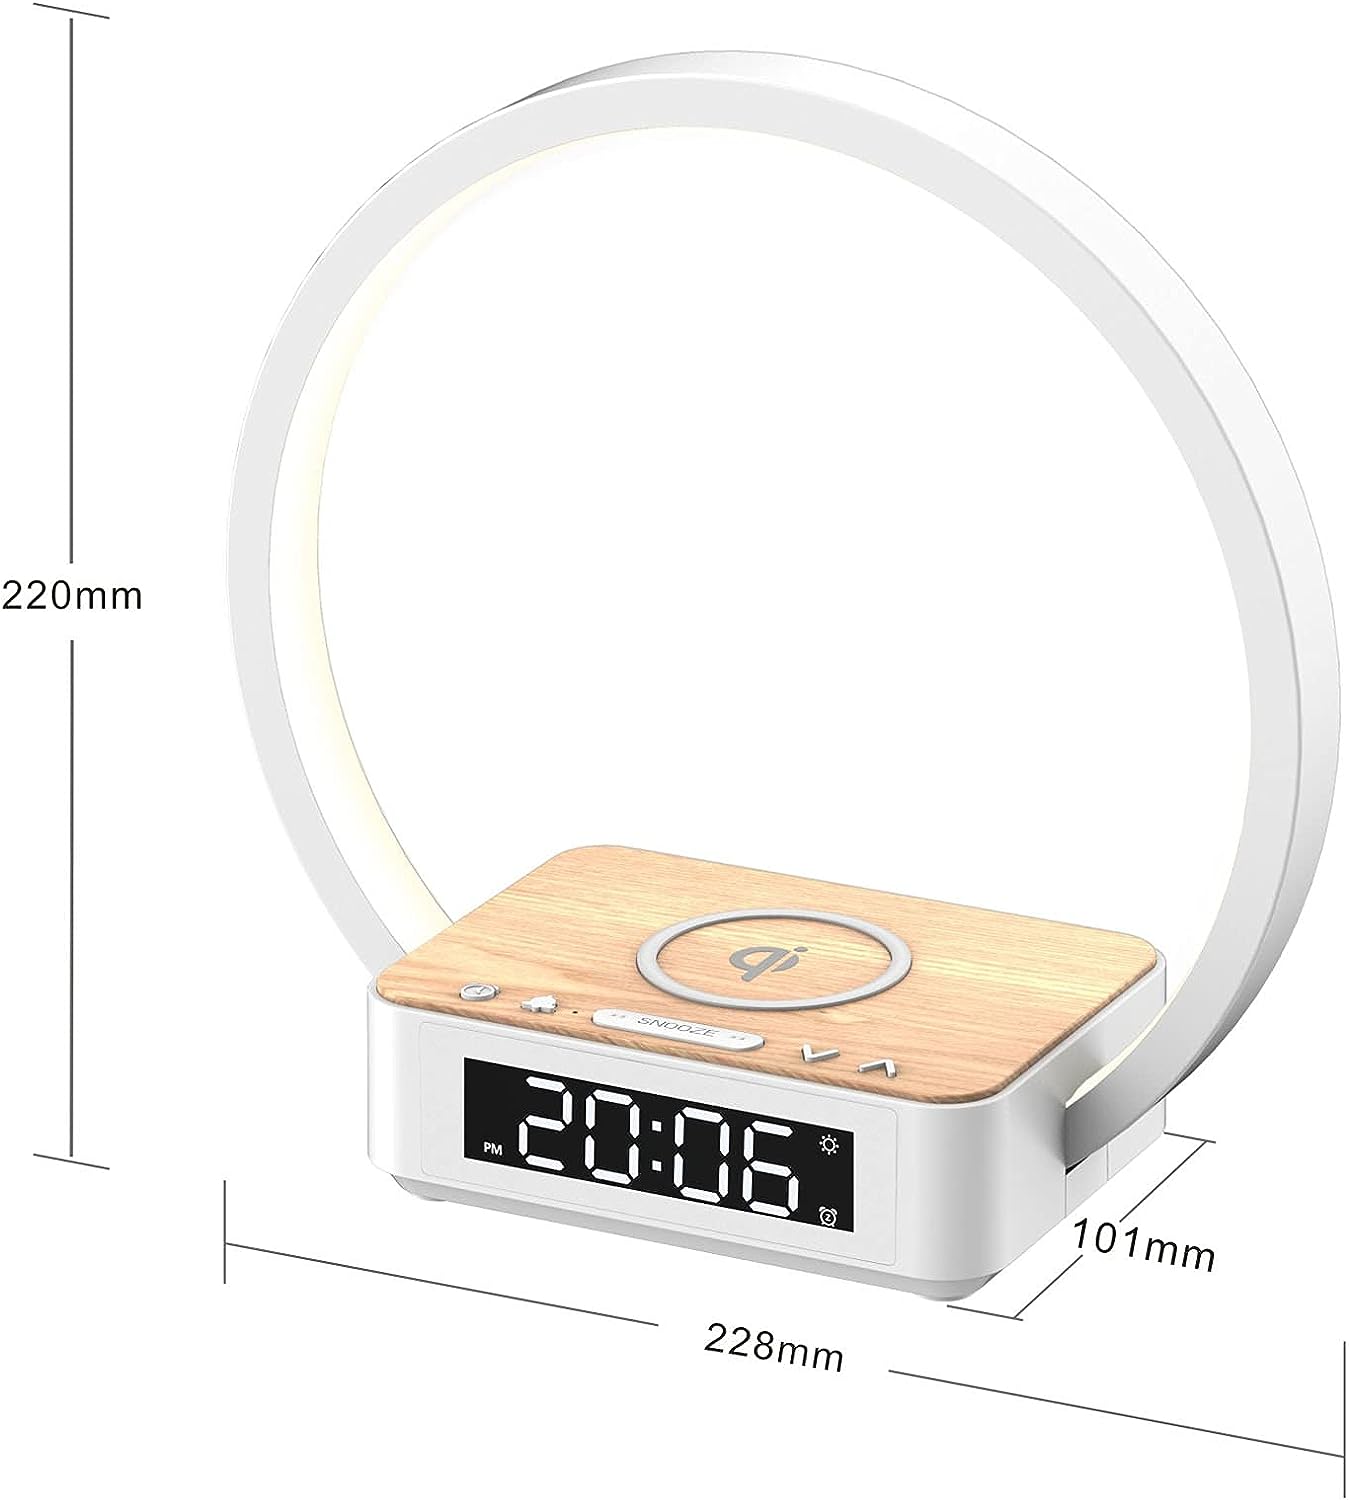 blonbar Bedside Lamp Qi Wireless Charger LED Desk Lamp with Alarm Clock, Touch Control 3 Light Hues, 10W Max Wireless Charging Table Lamp，Eye-Caring Reading Light for Kids, Adults, Home.